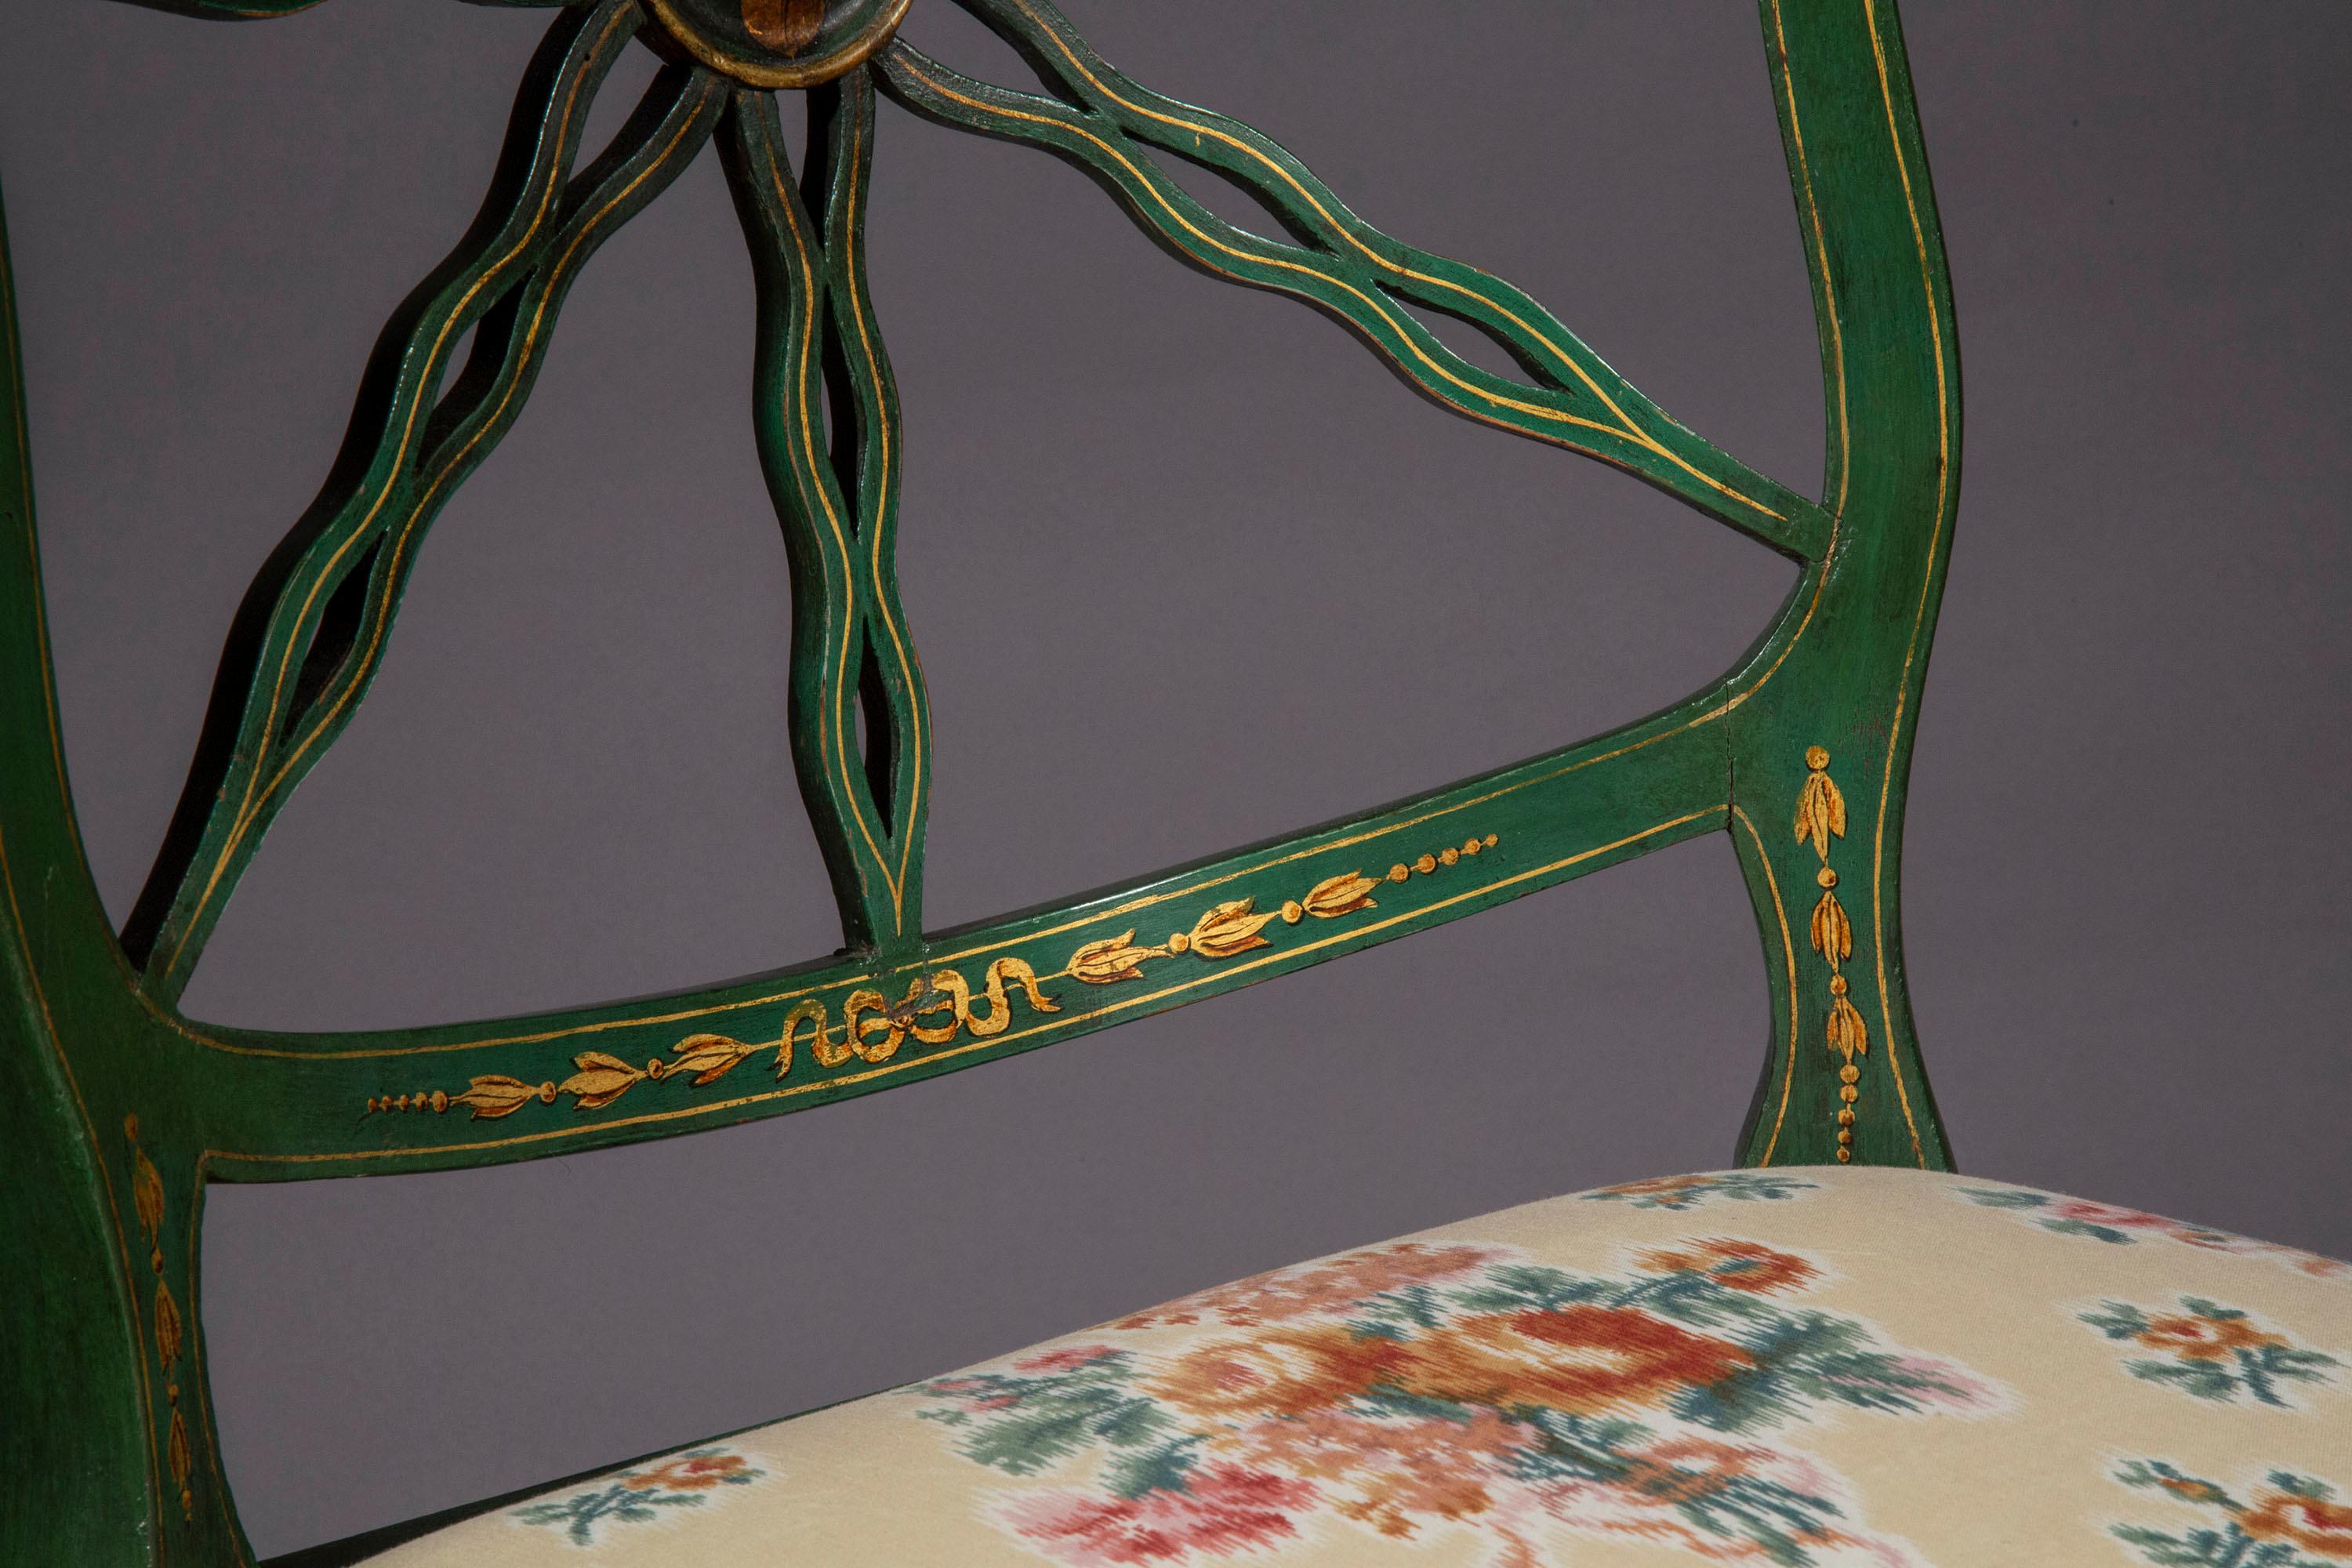 Pair of Antique Green Painted Chairs - 3 pairs available 6